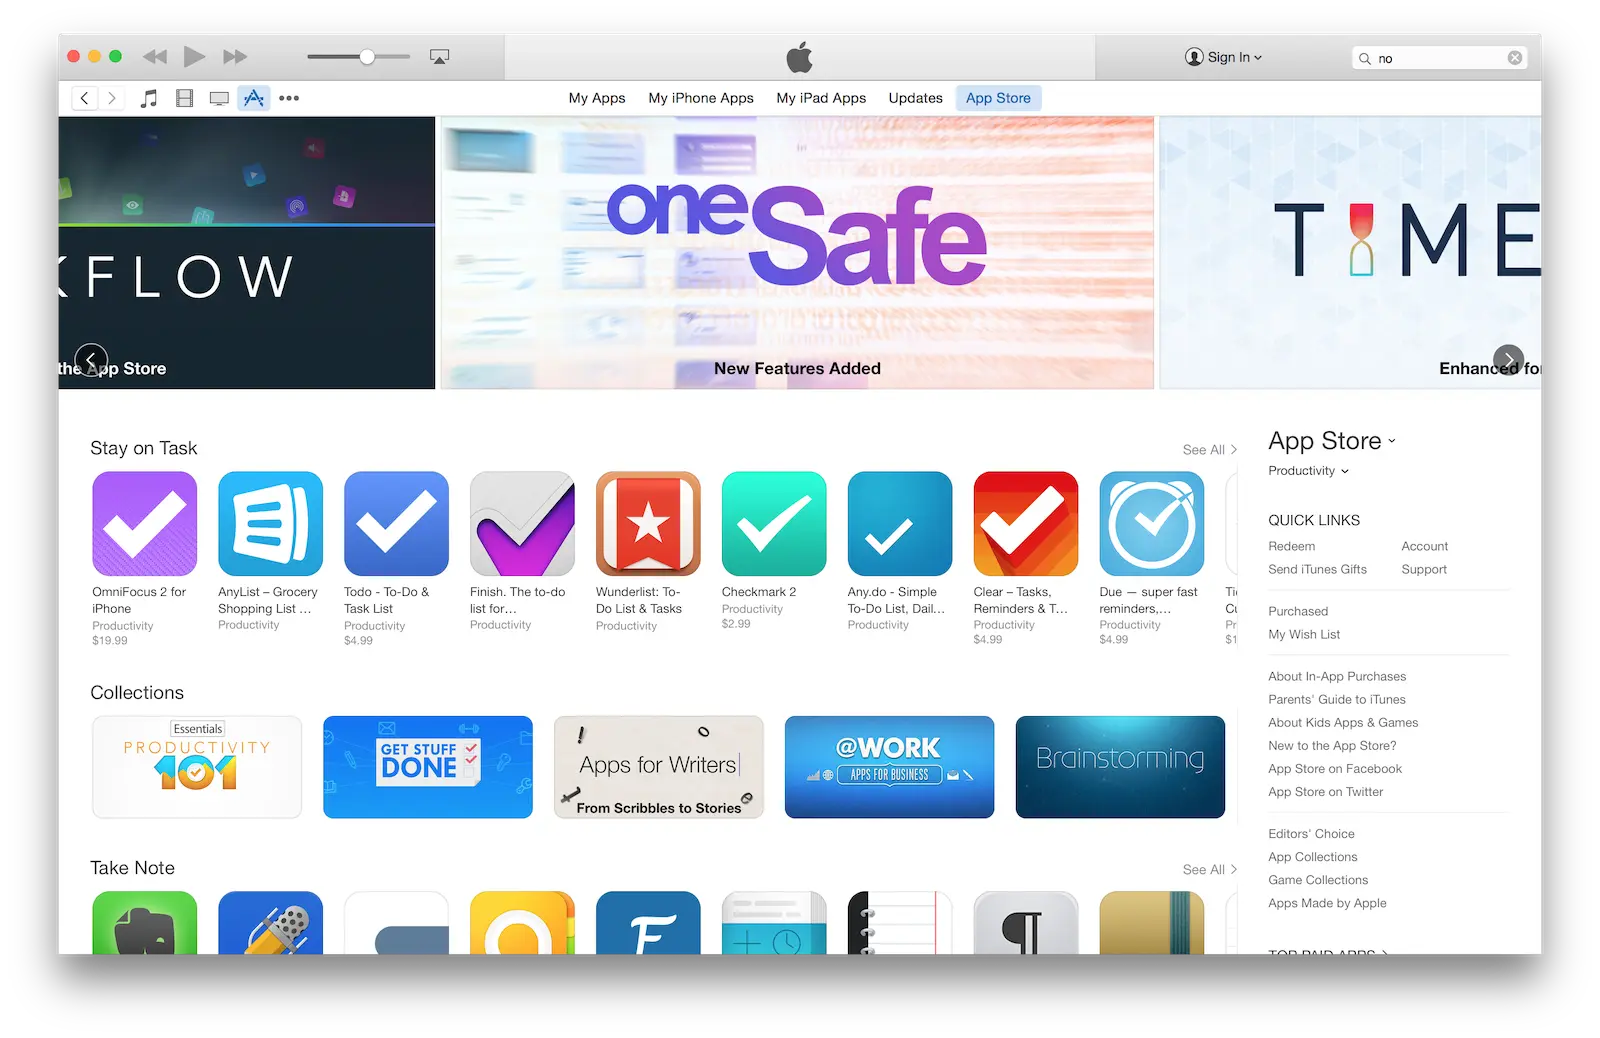 oneSafe featured by Apple App Store screenshot